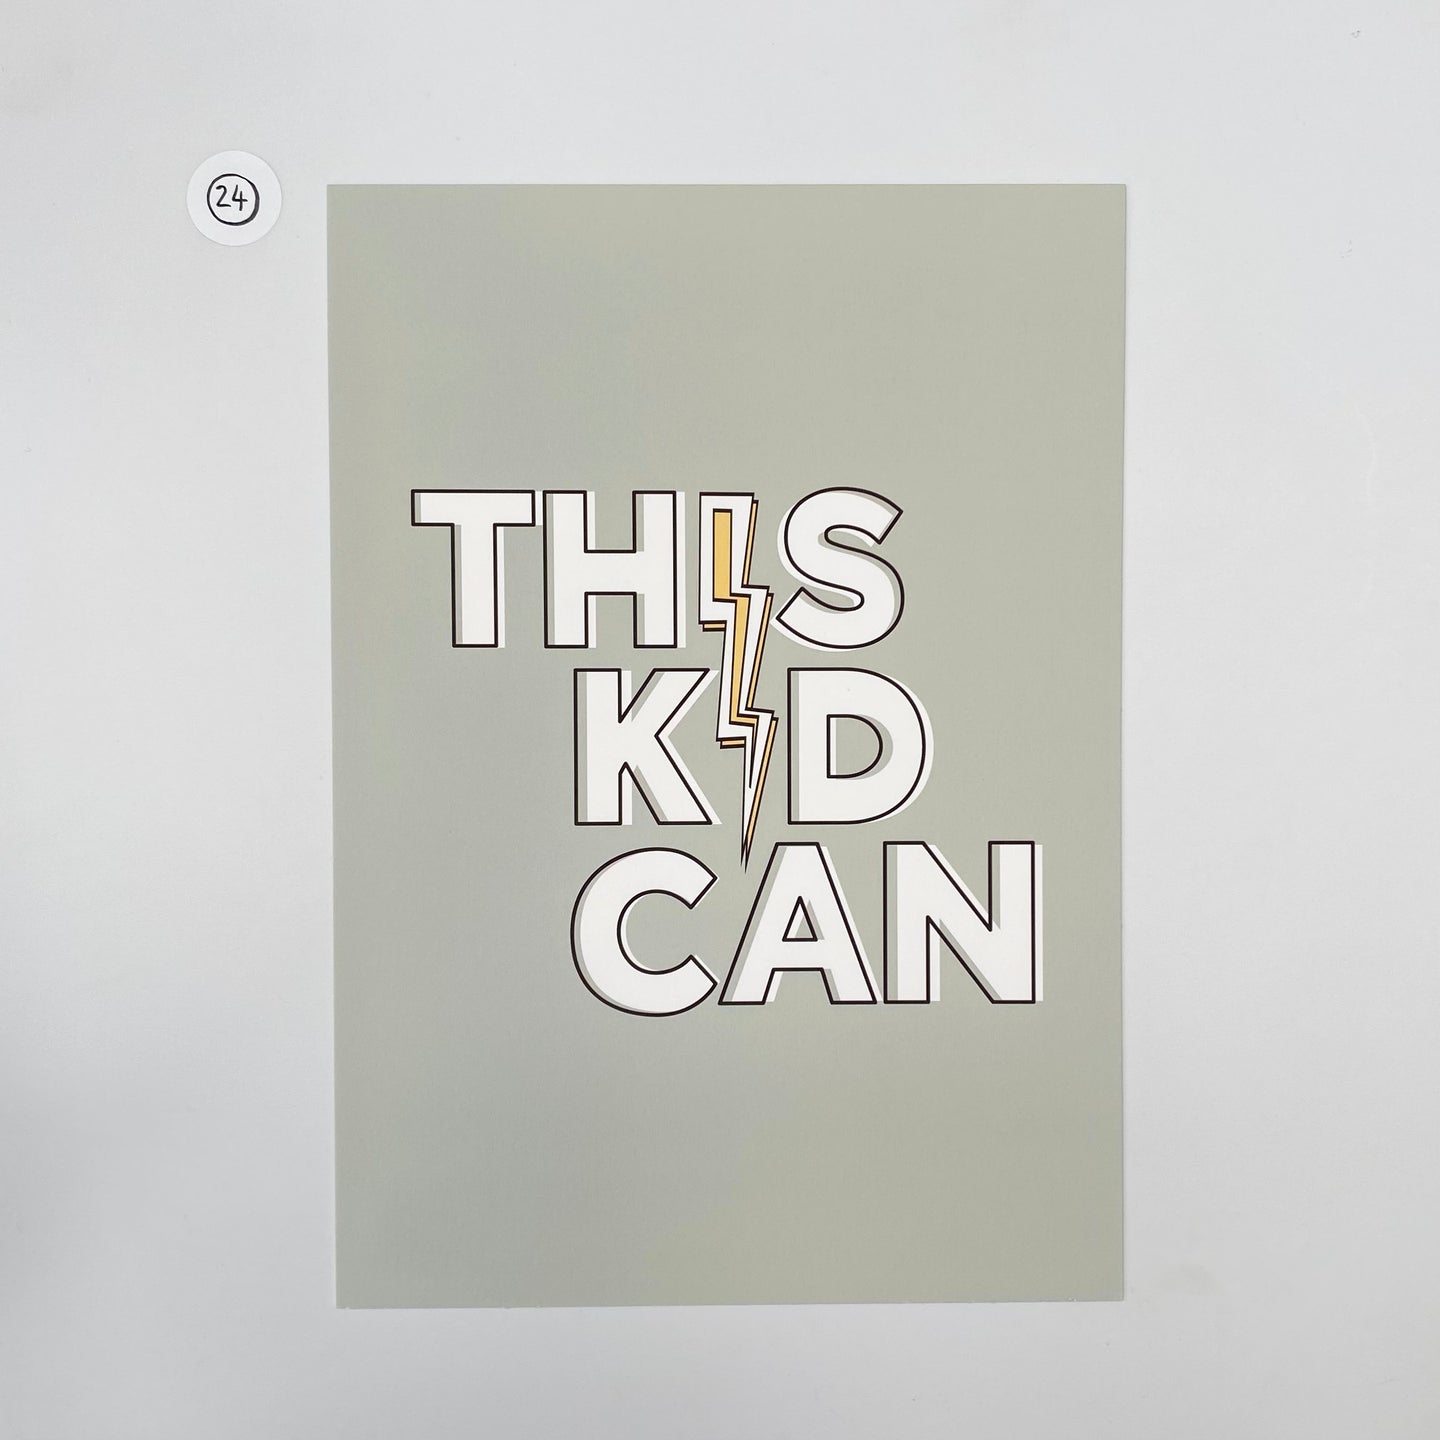 Outlet 24: This Kid Can - A4